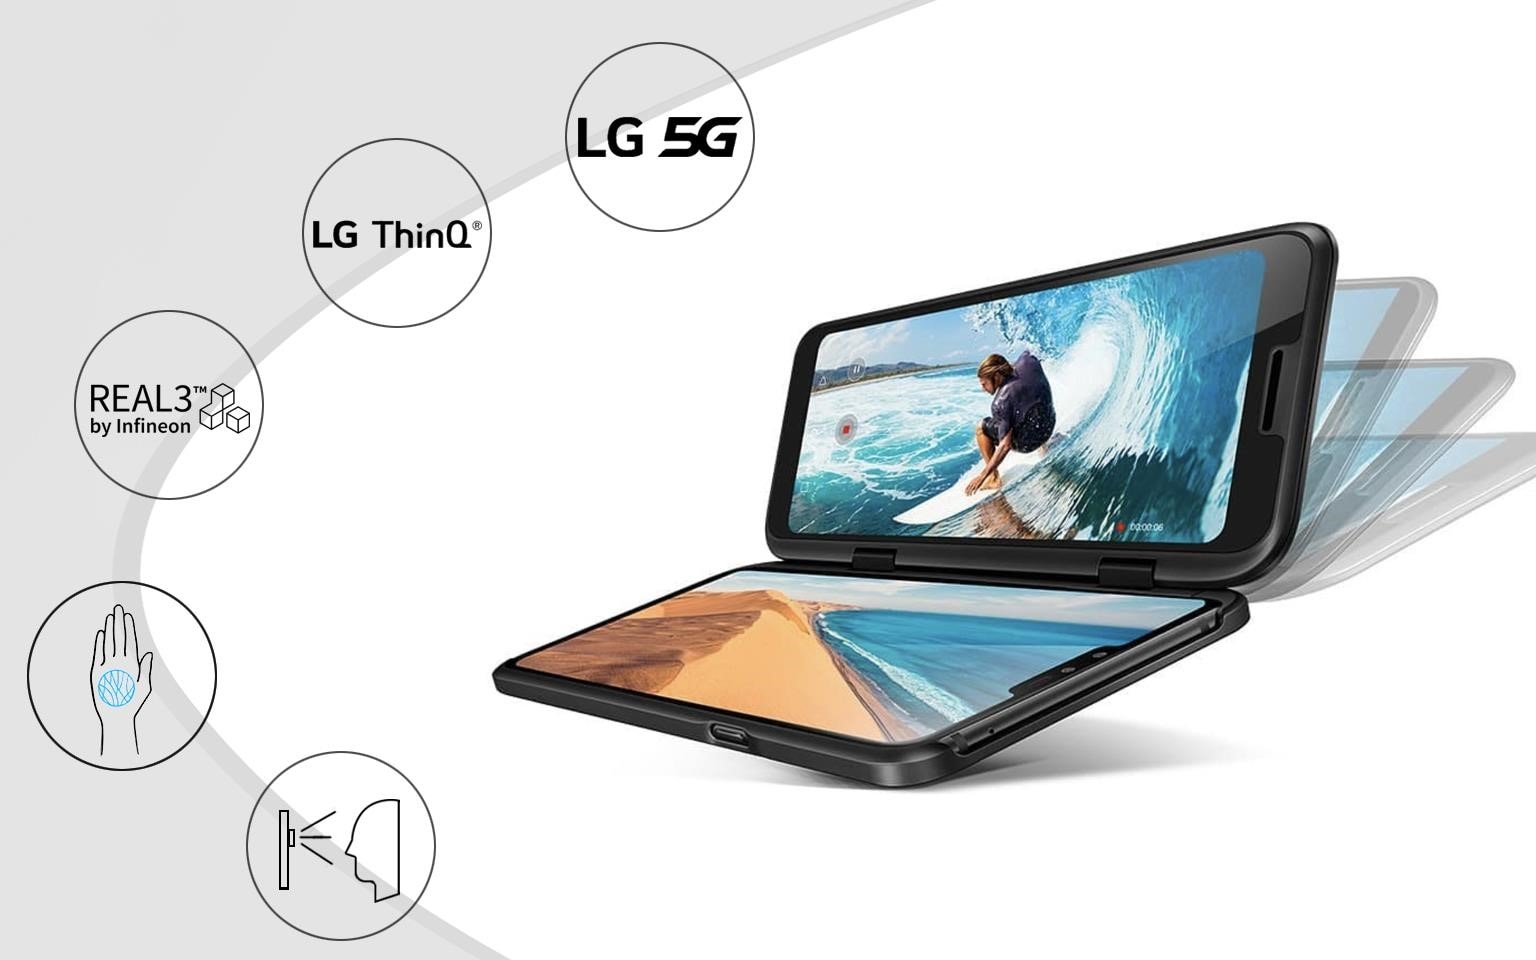 The LG dual display allows you do multi-task with ease, so you can get the most our of your 5G phone | More at LG MAGAZINE